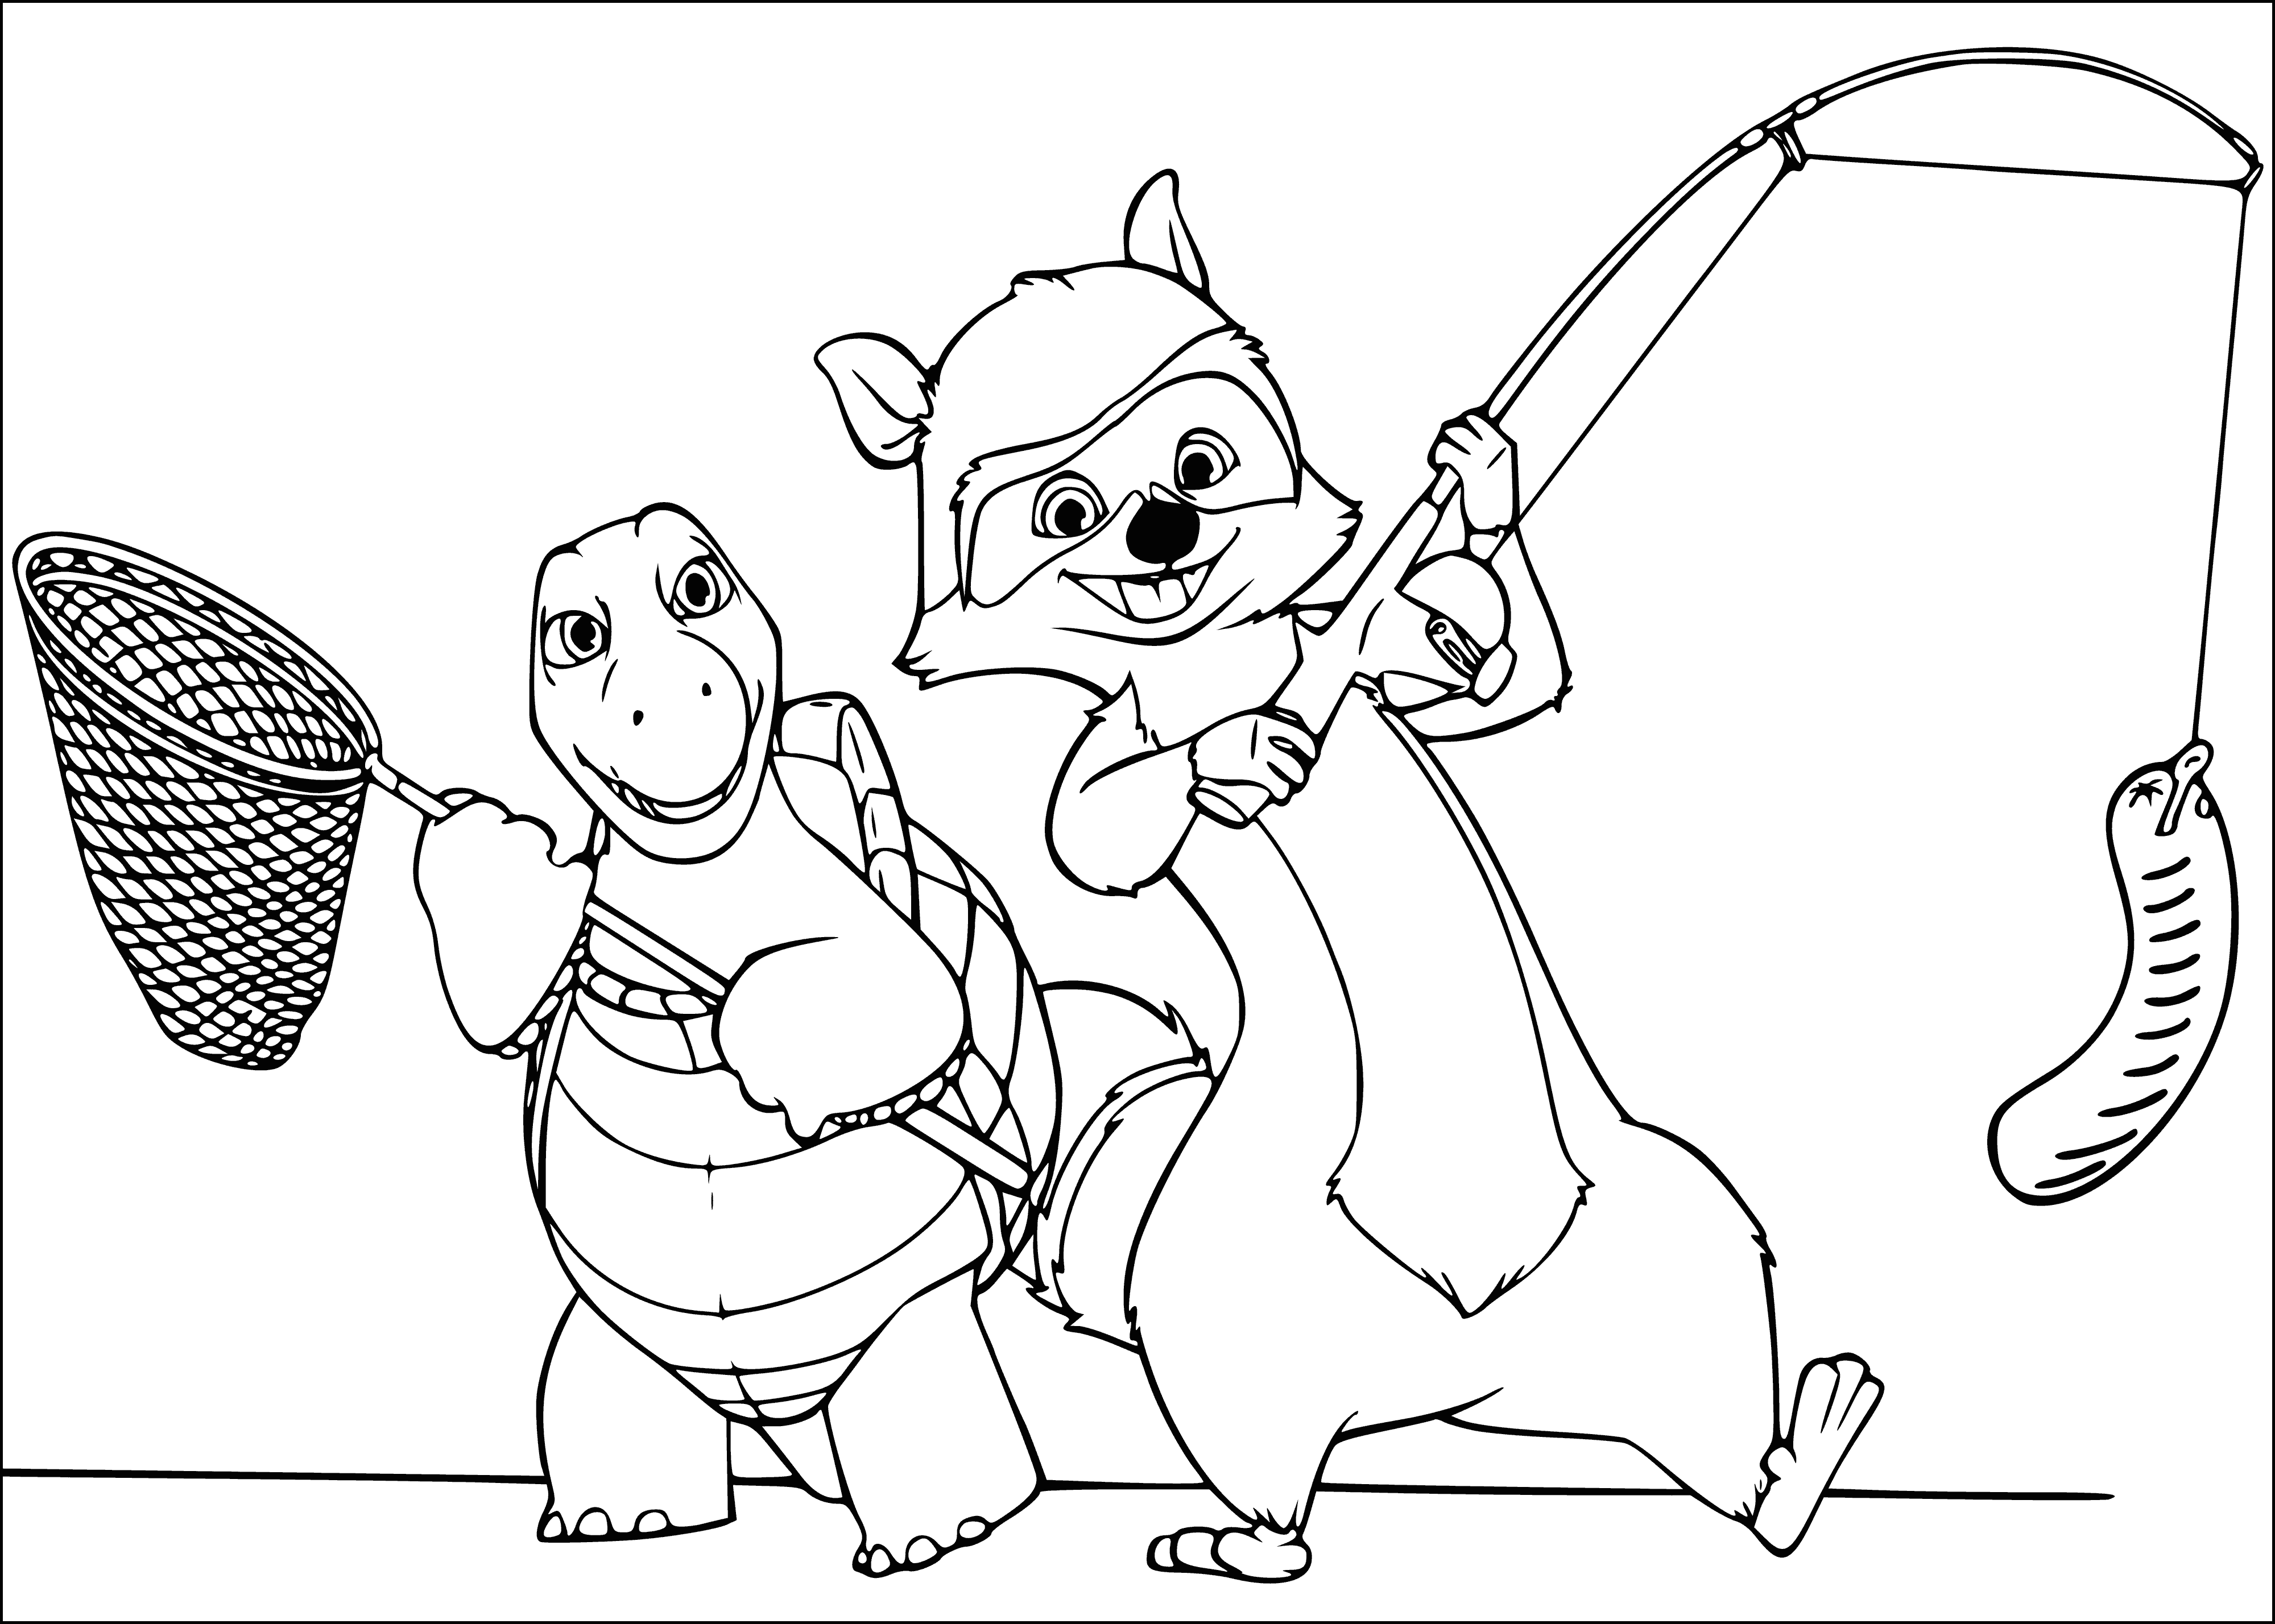 On the sausage coloring page